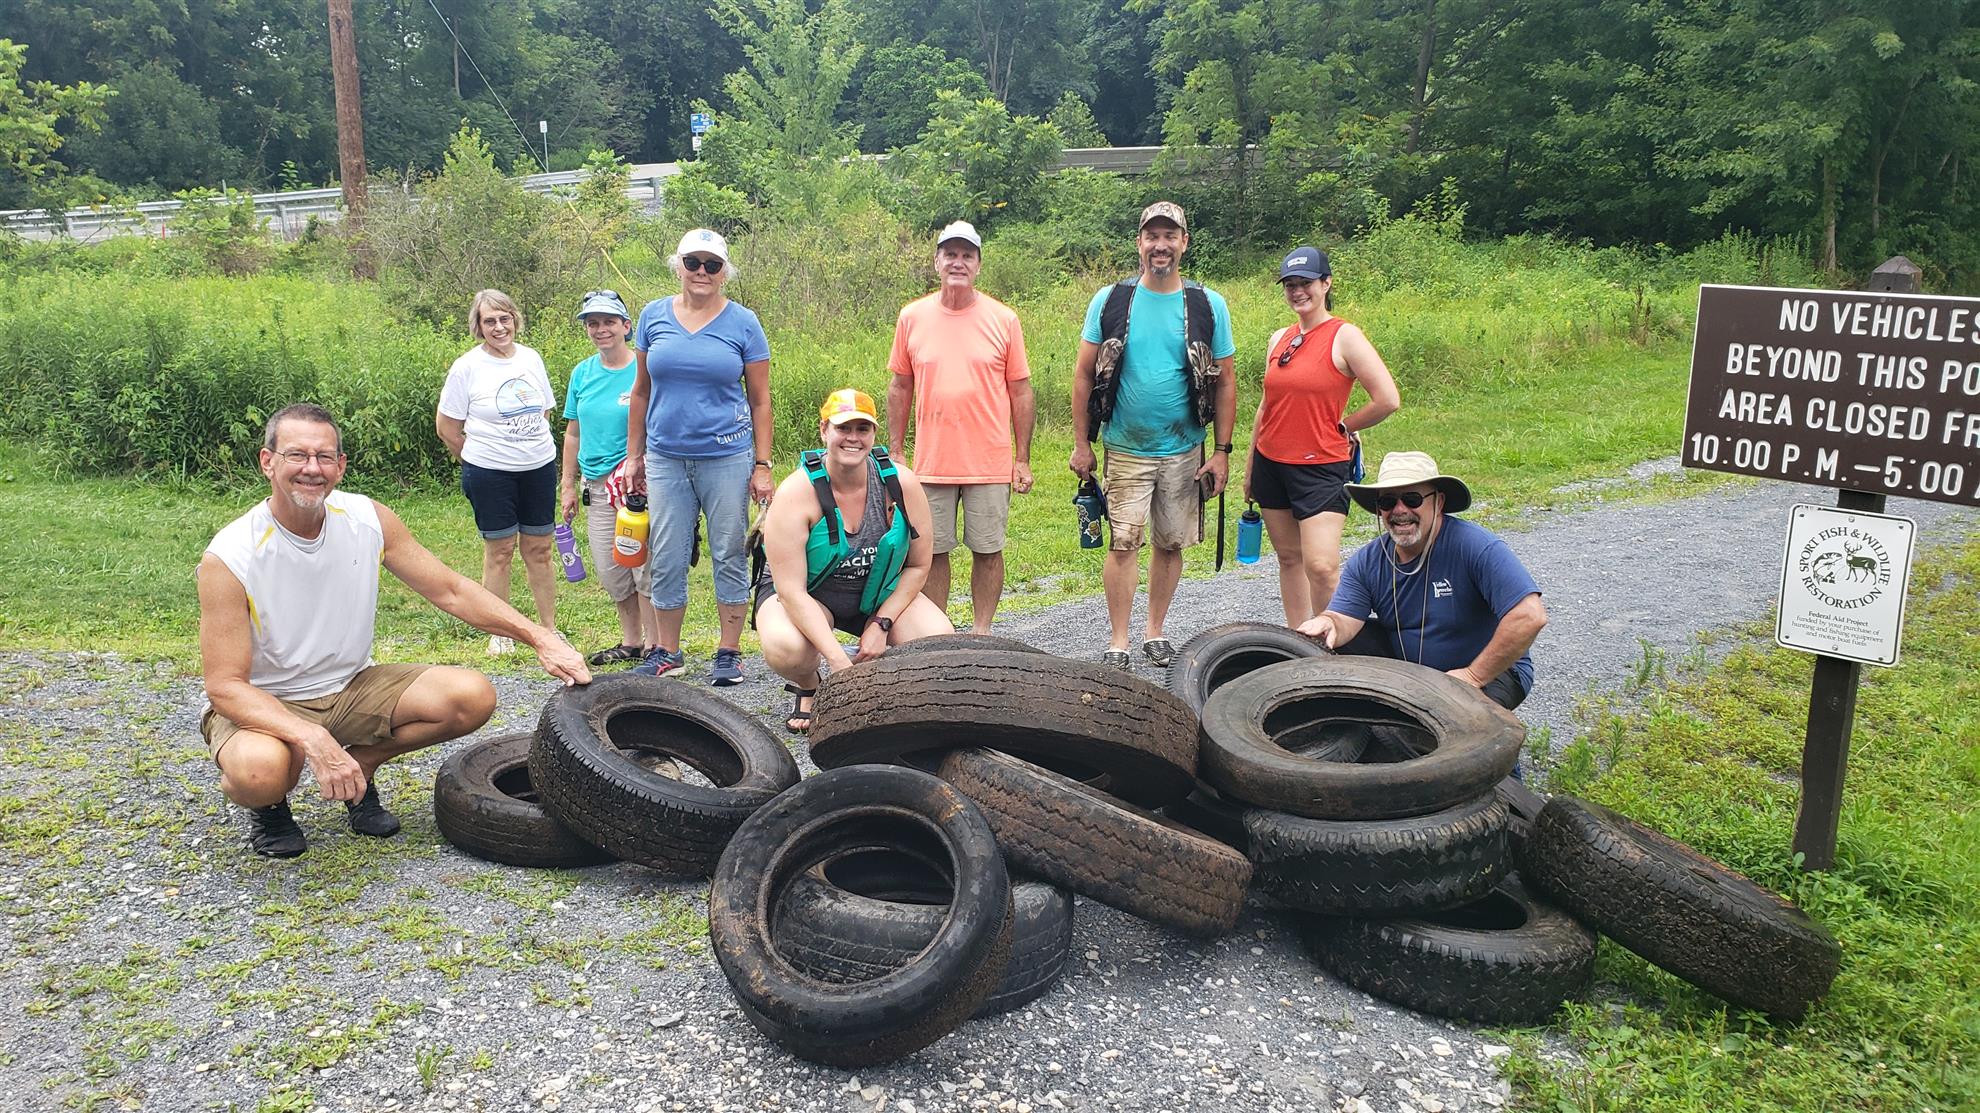 Group B's Tire Collection pulled from the creek